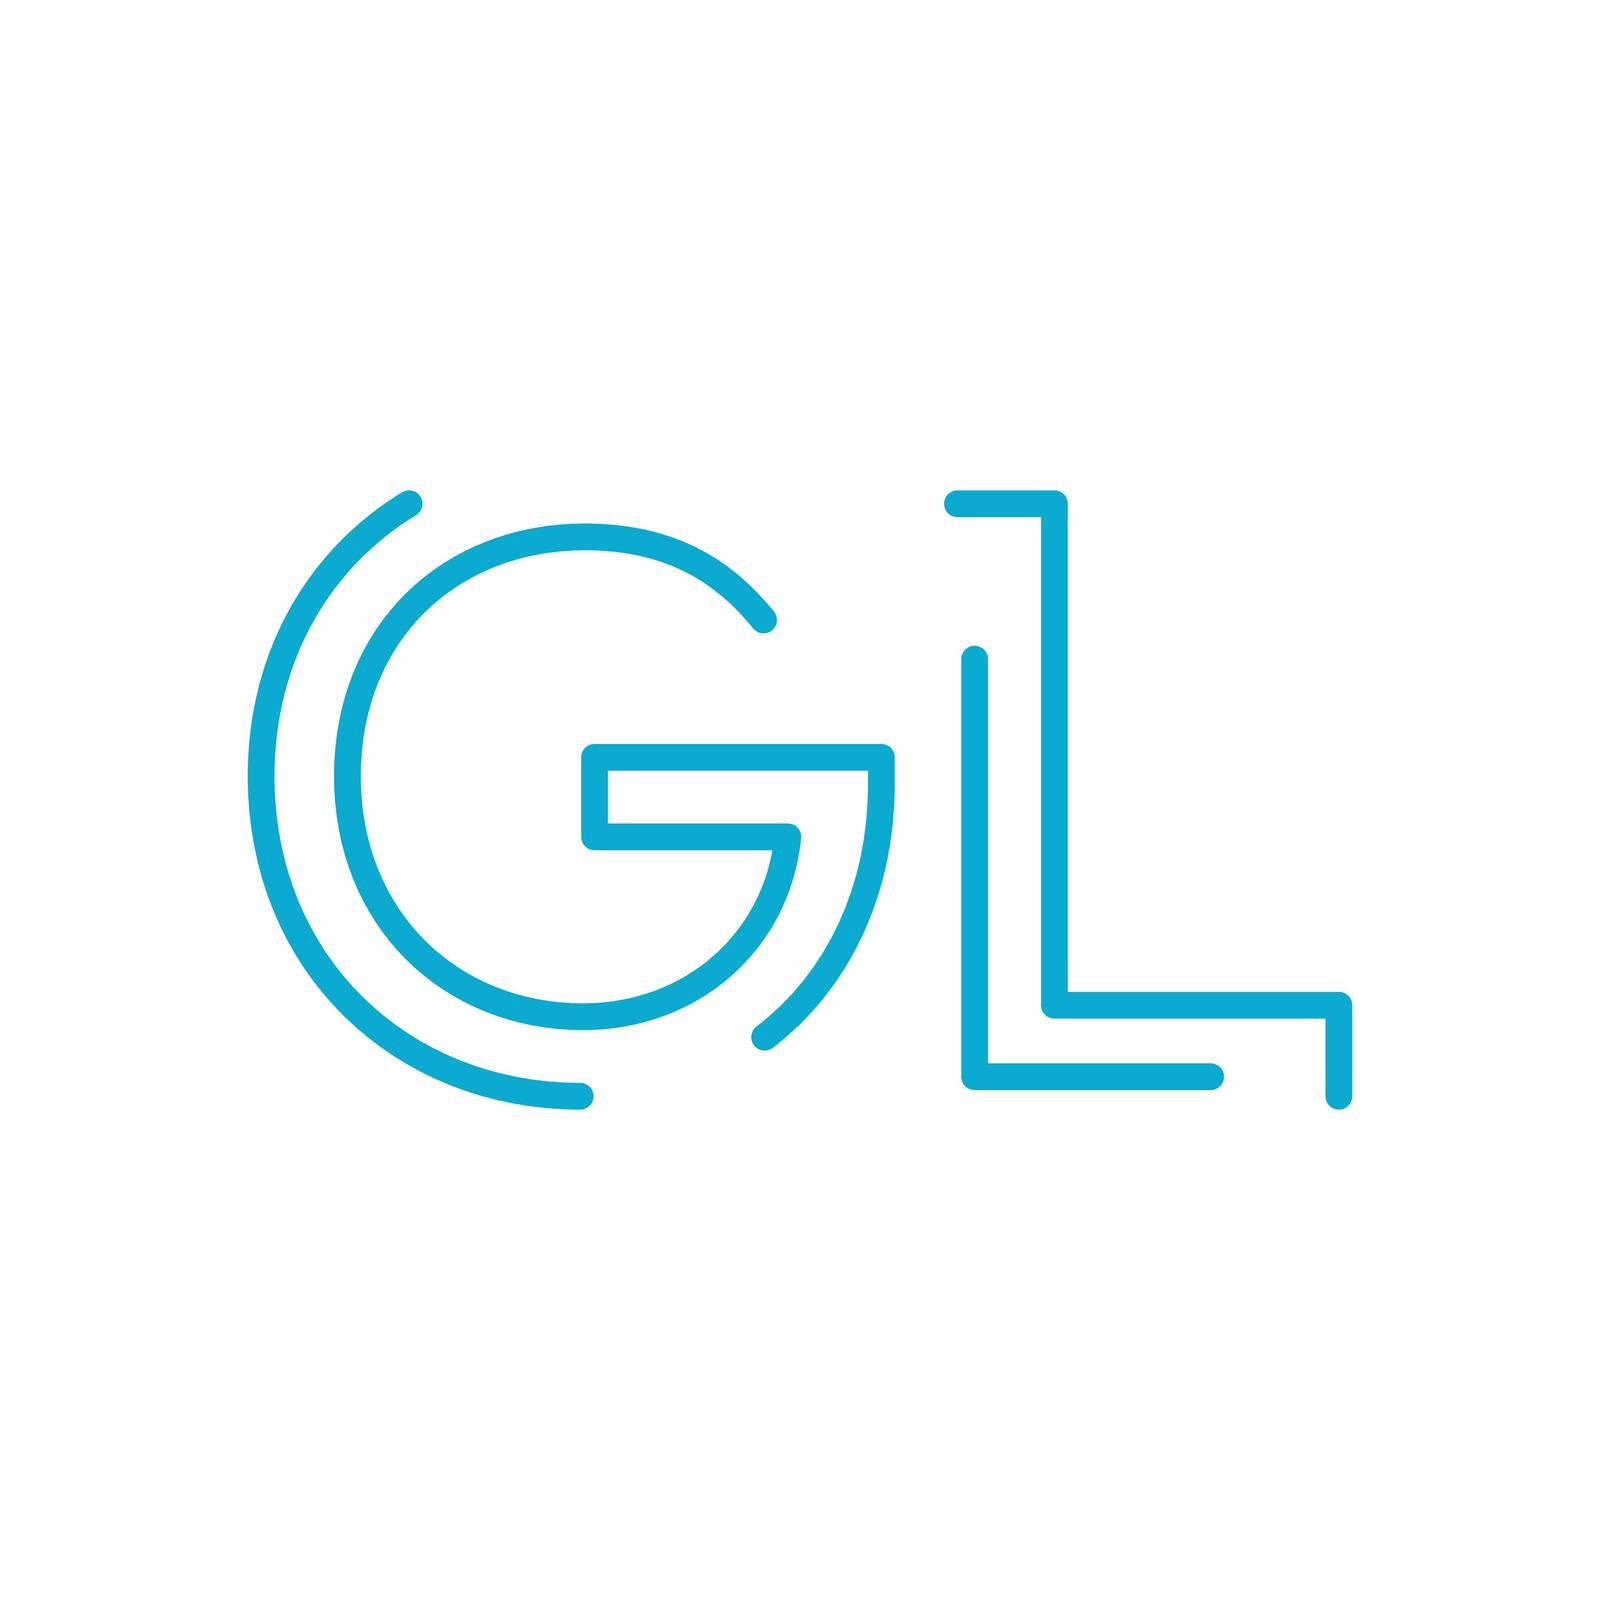 GL initial letter logo gl, lg, Blue graphic element for typography style, minimalistic letter design. Editable stroke. Stock vector illustration isolated on white background. by Kyrylov